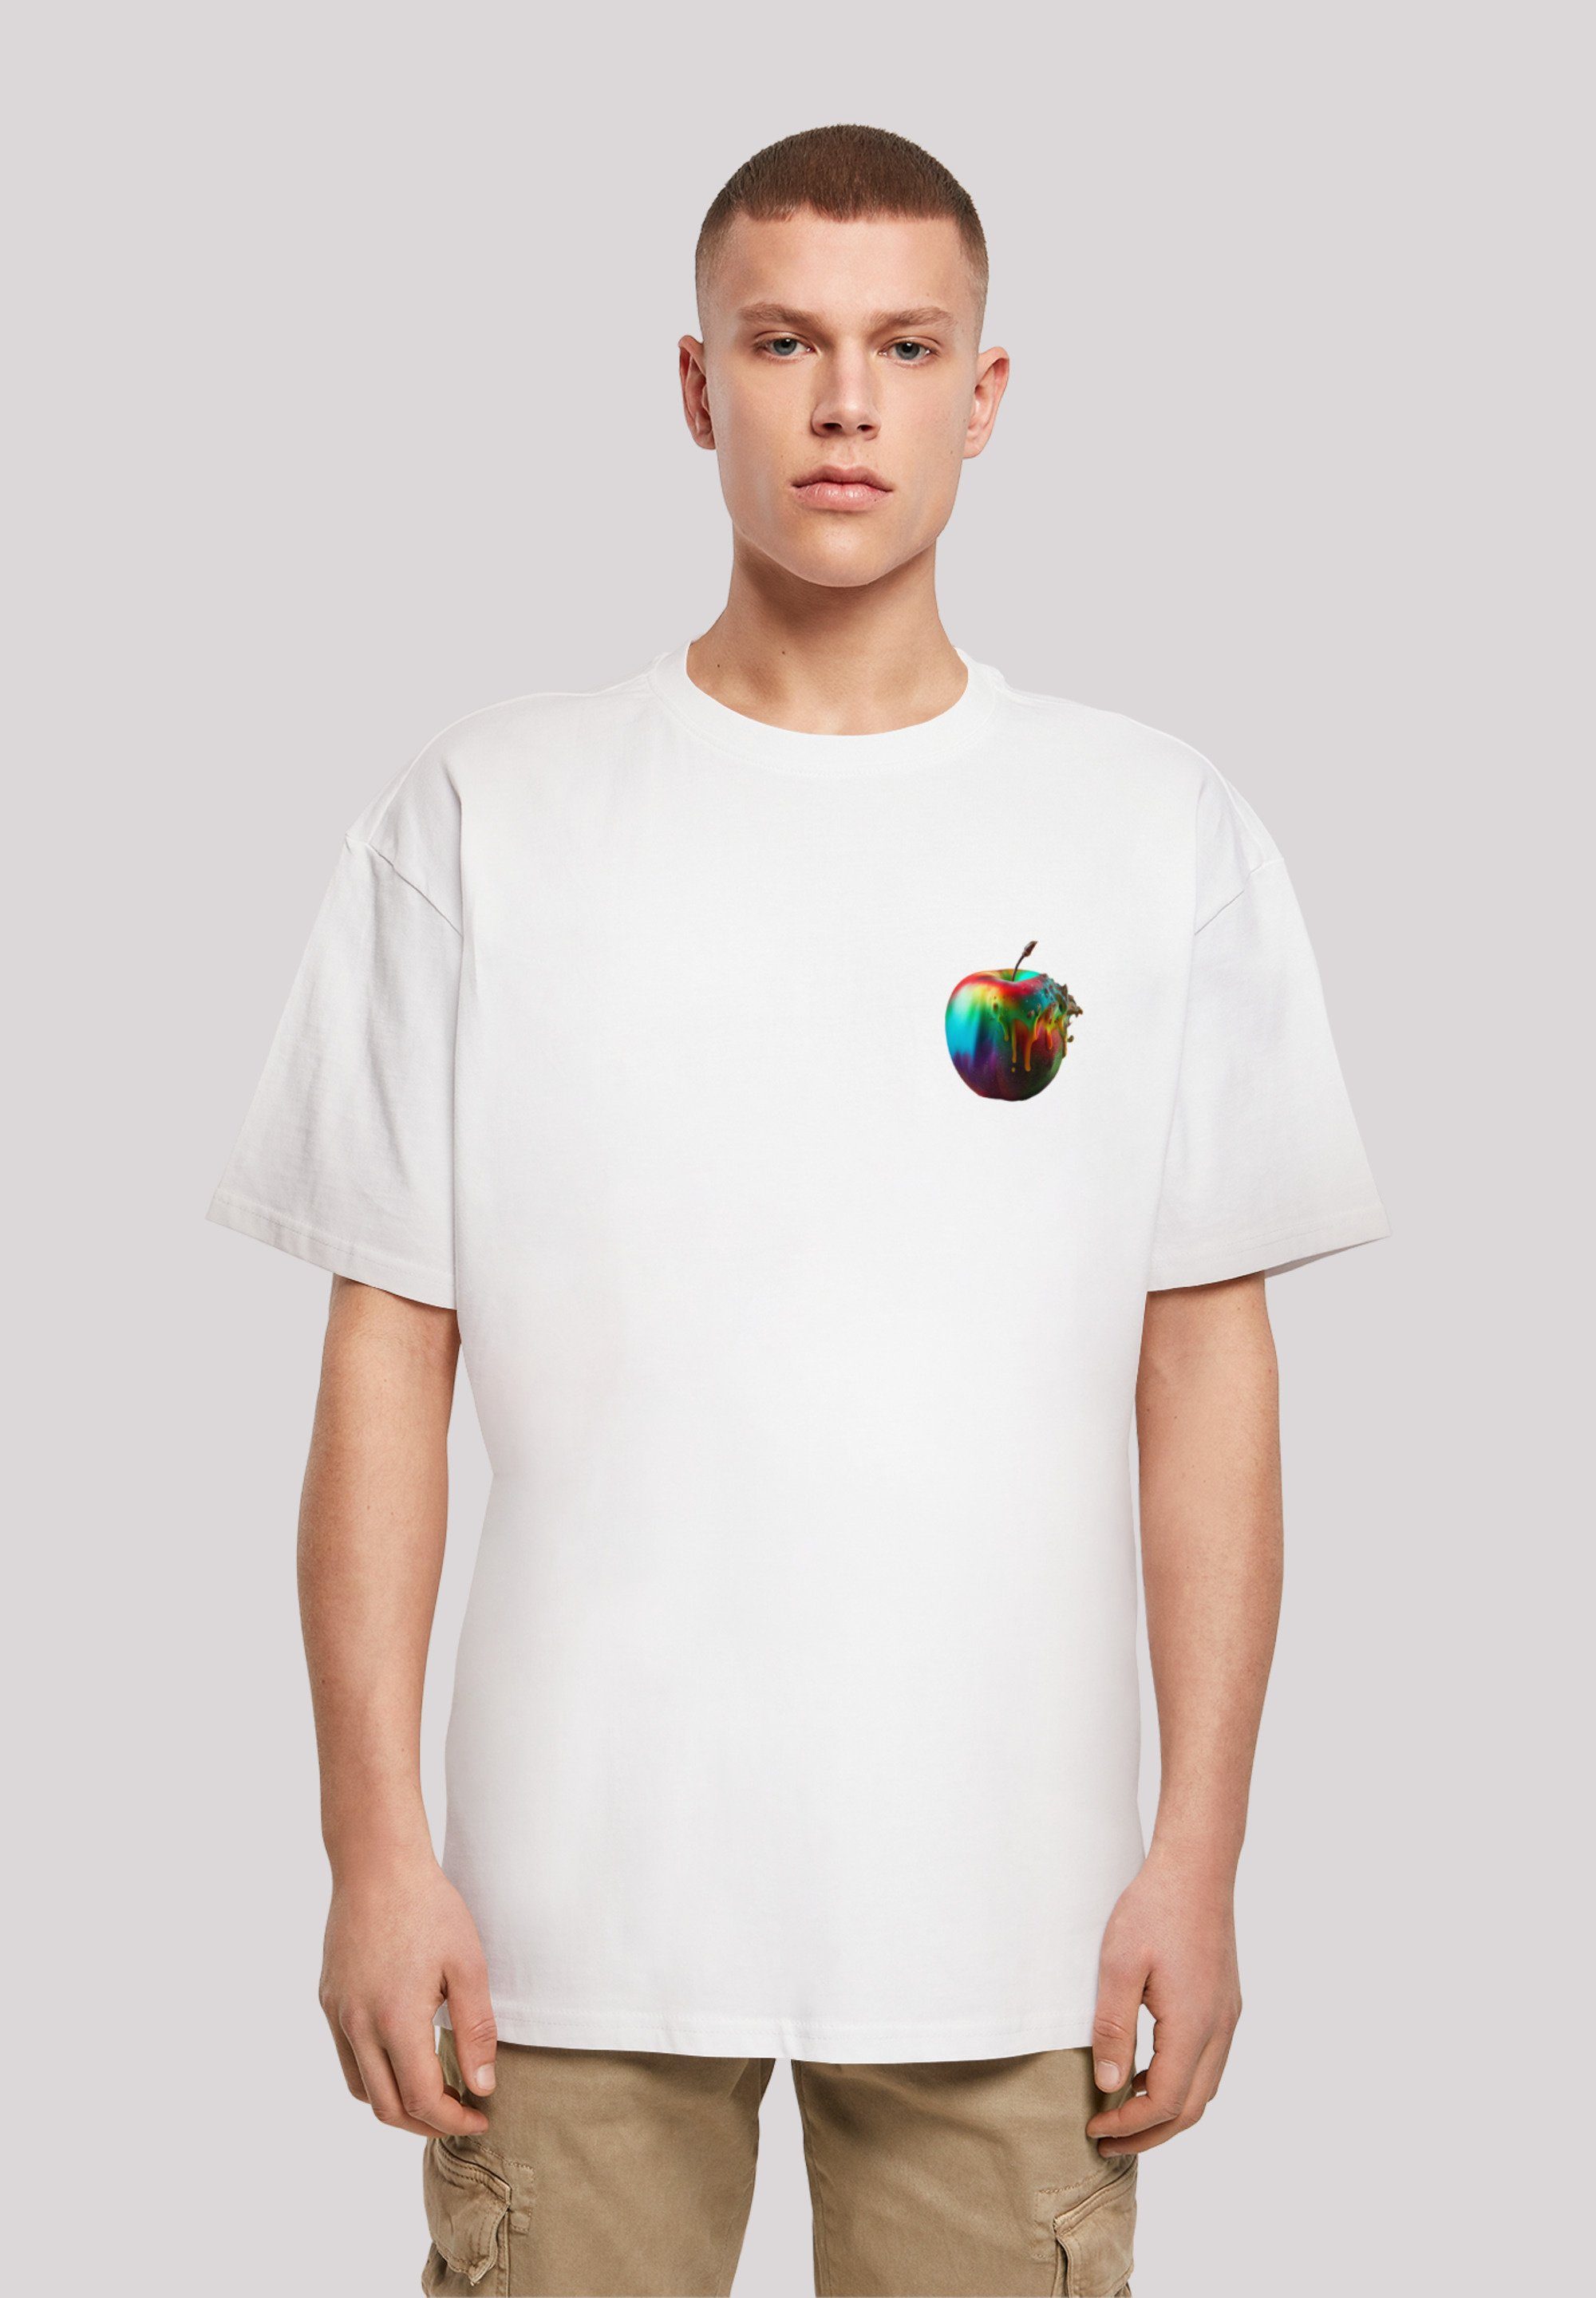 F4NT4STIC T-Shirt Colorfood Collection - Rainbow Apple Print weiß